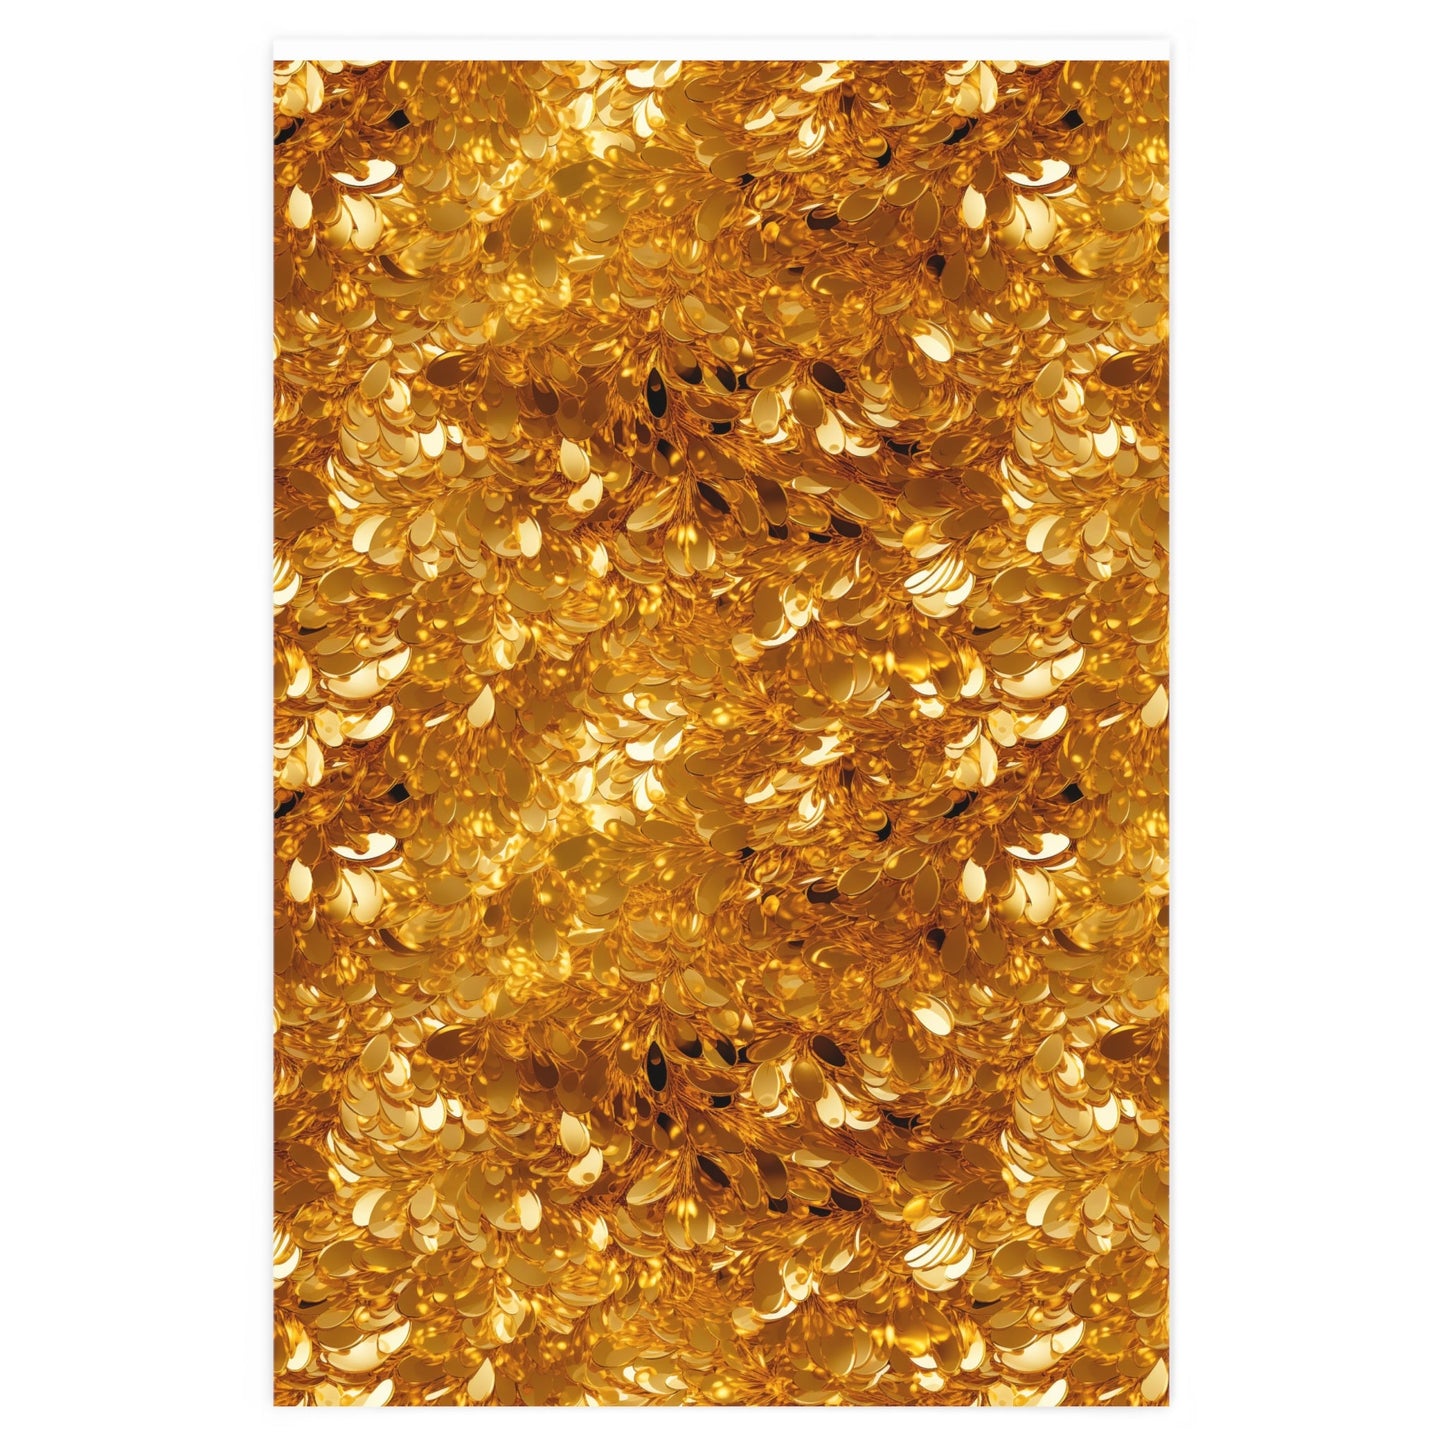 Gold Texture Wrapping Paper Rolls from The Curated Goose